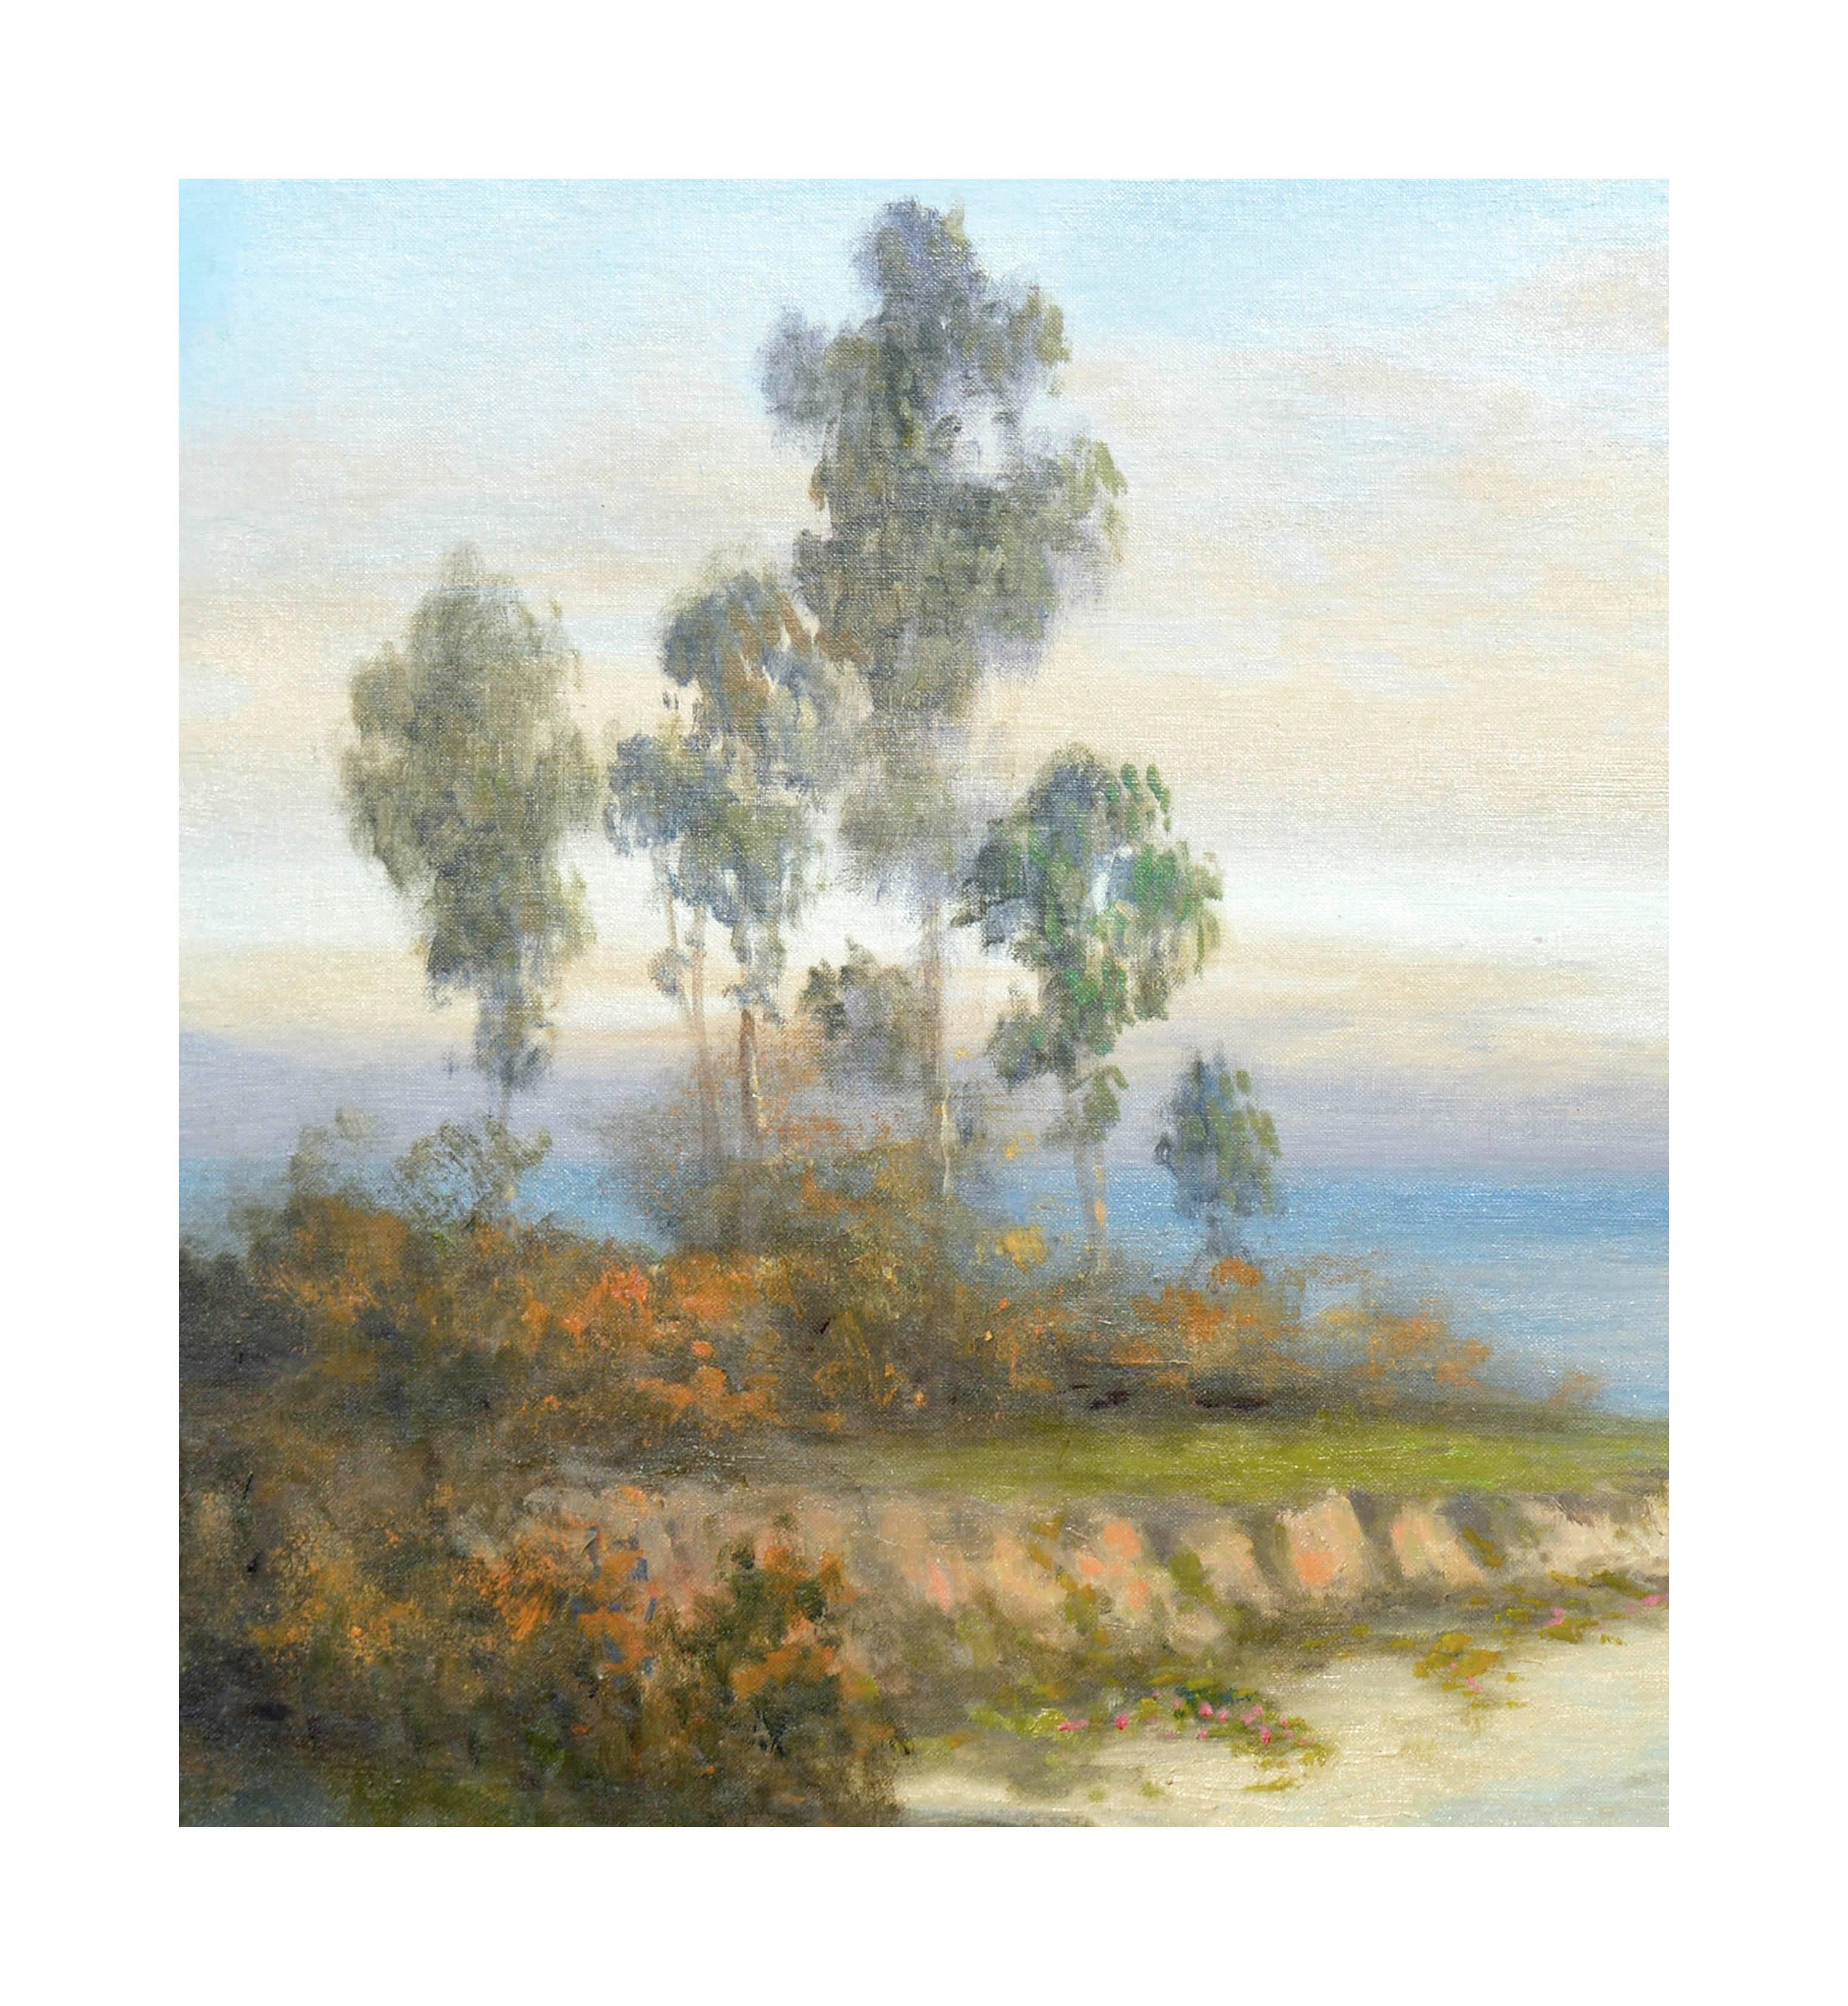 Mid Century Carmel Coast and Eucalyptus Landscape - Painting by Unknown